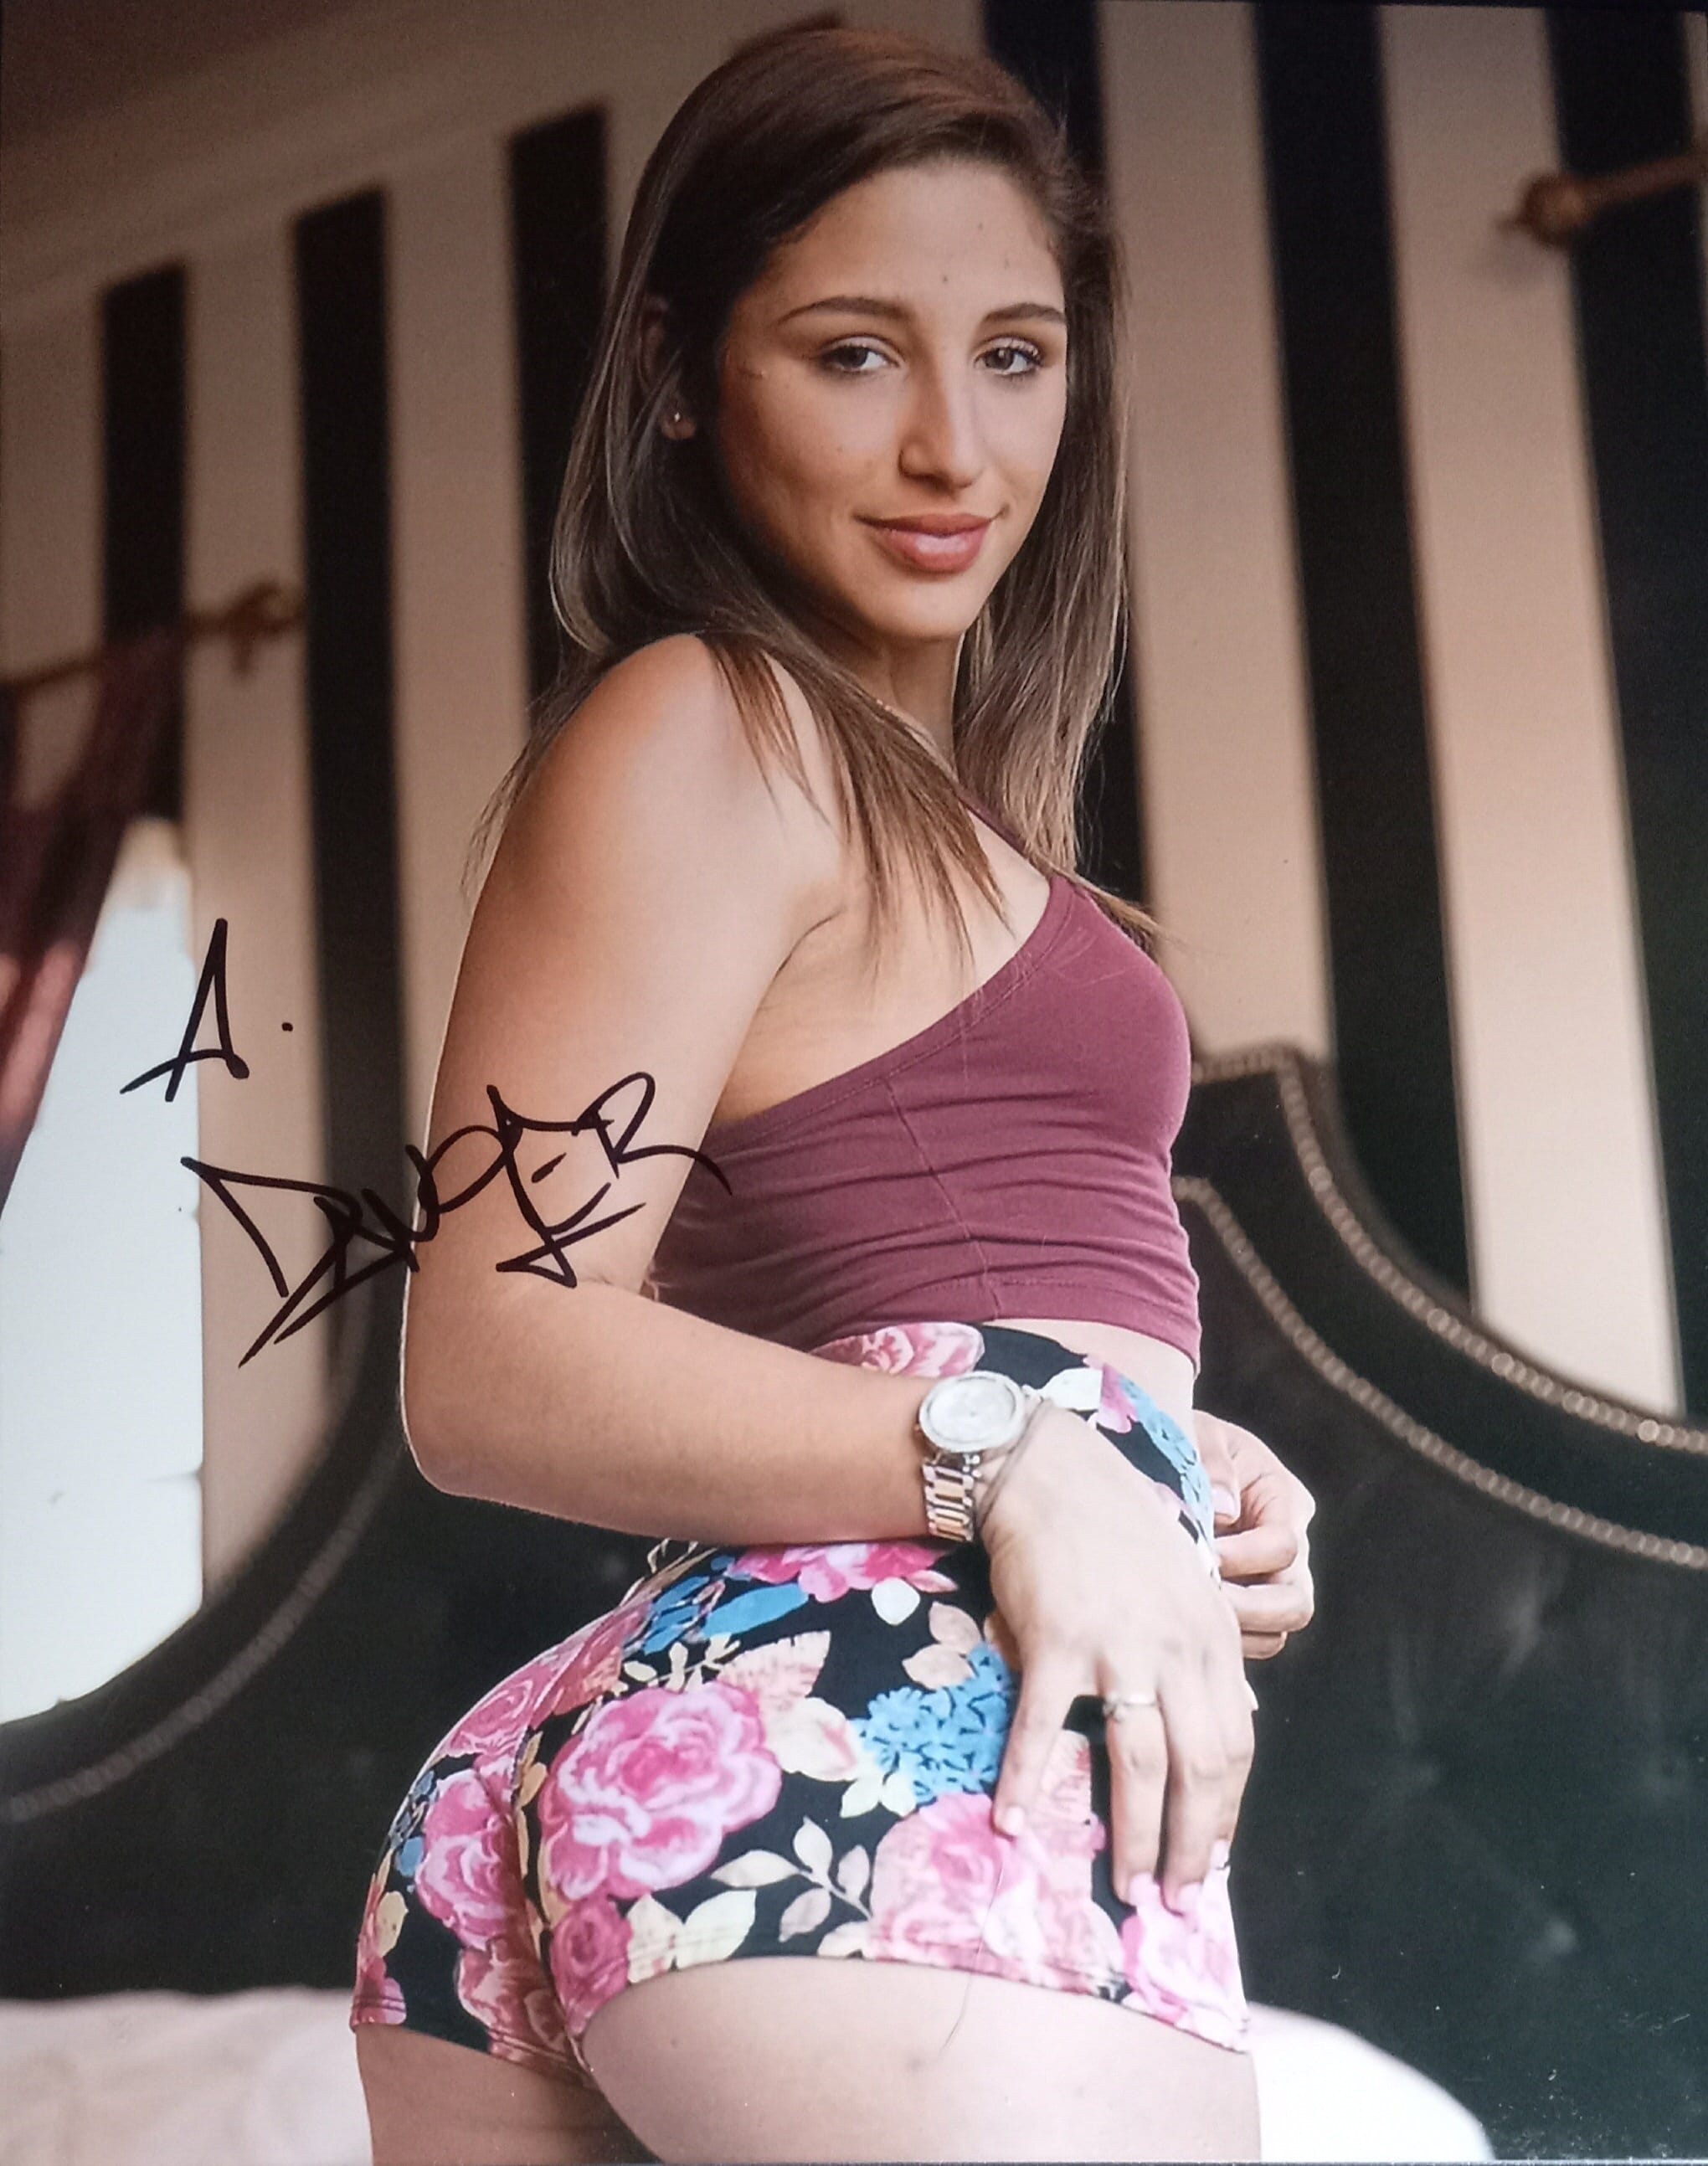 curtis mcfarlin recommends abella danger in clothes pic